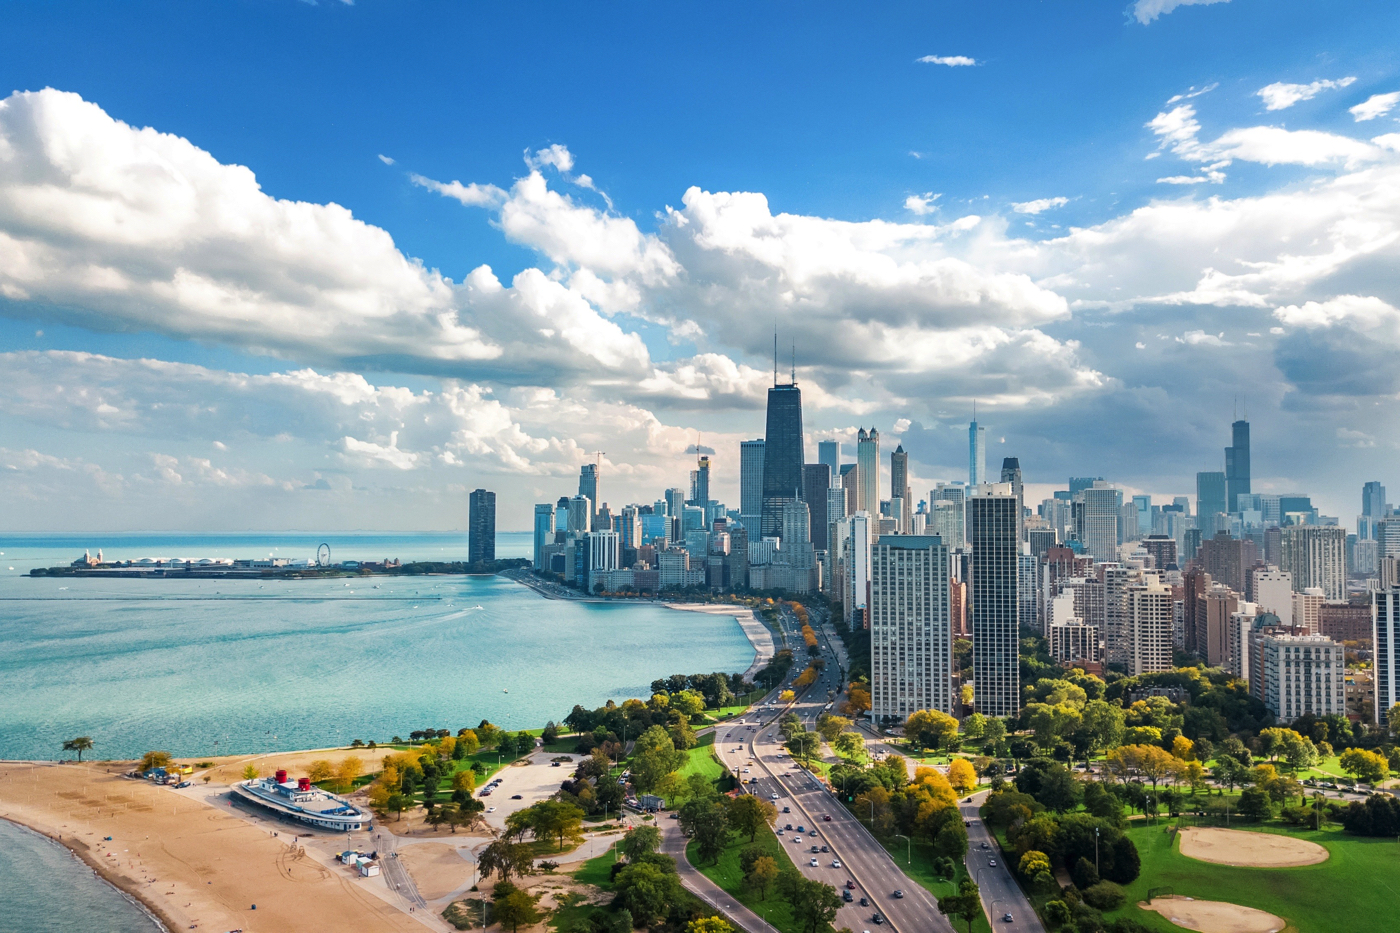 47 BEST THINGS TO DO IN CHICAGO YOU CAN'T MISS